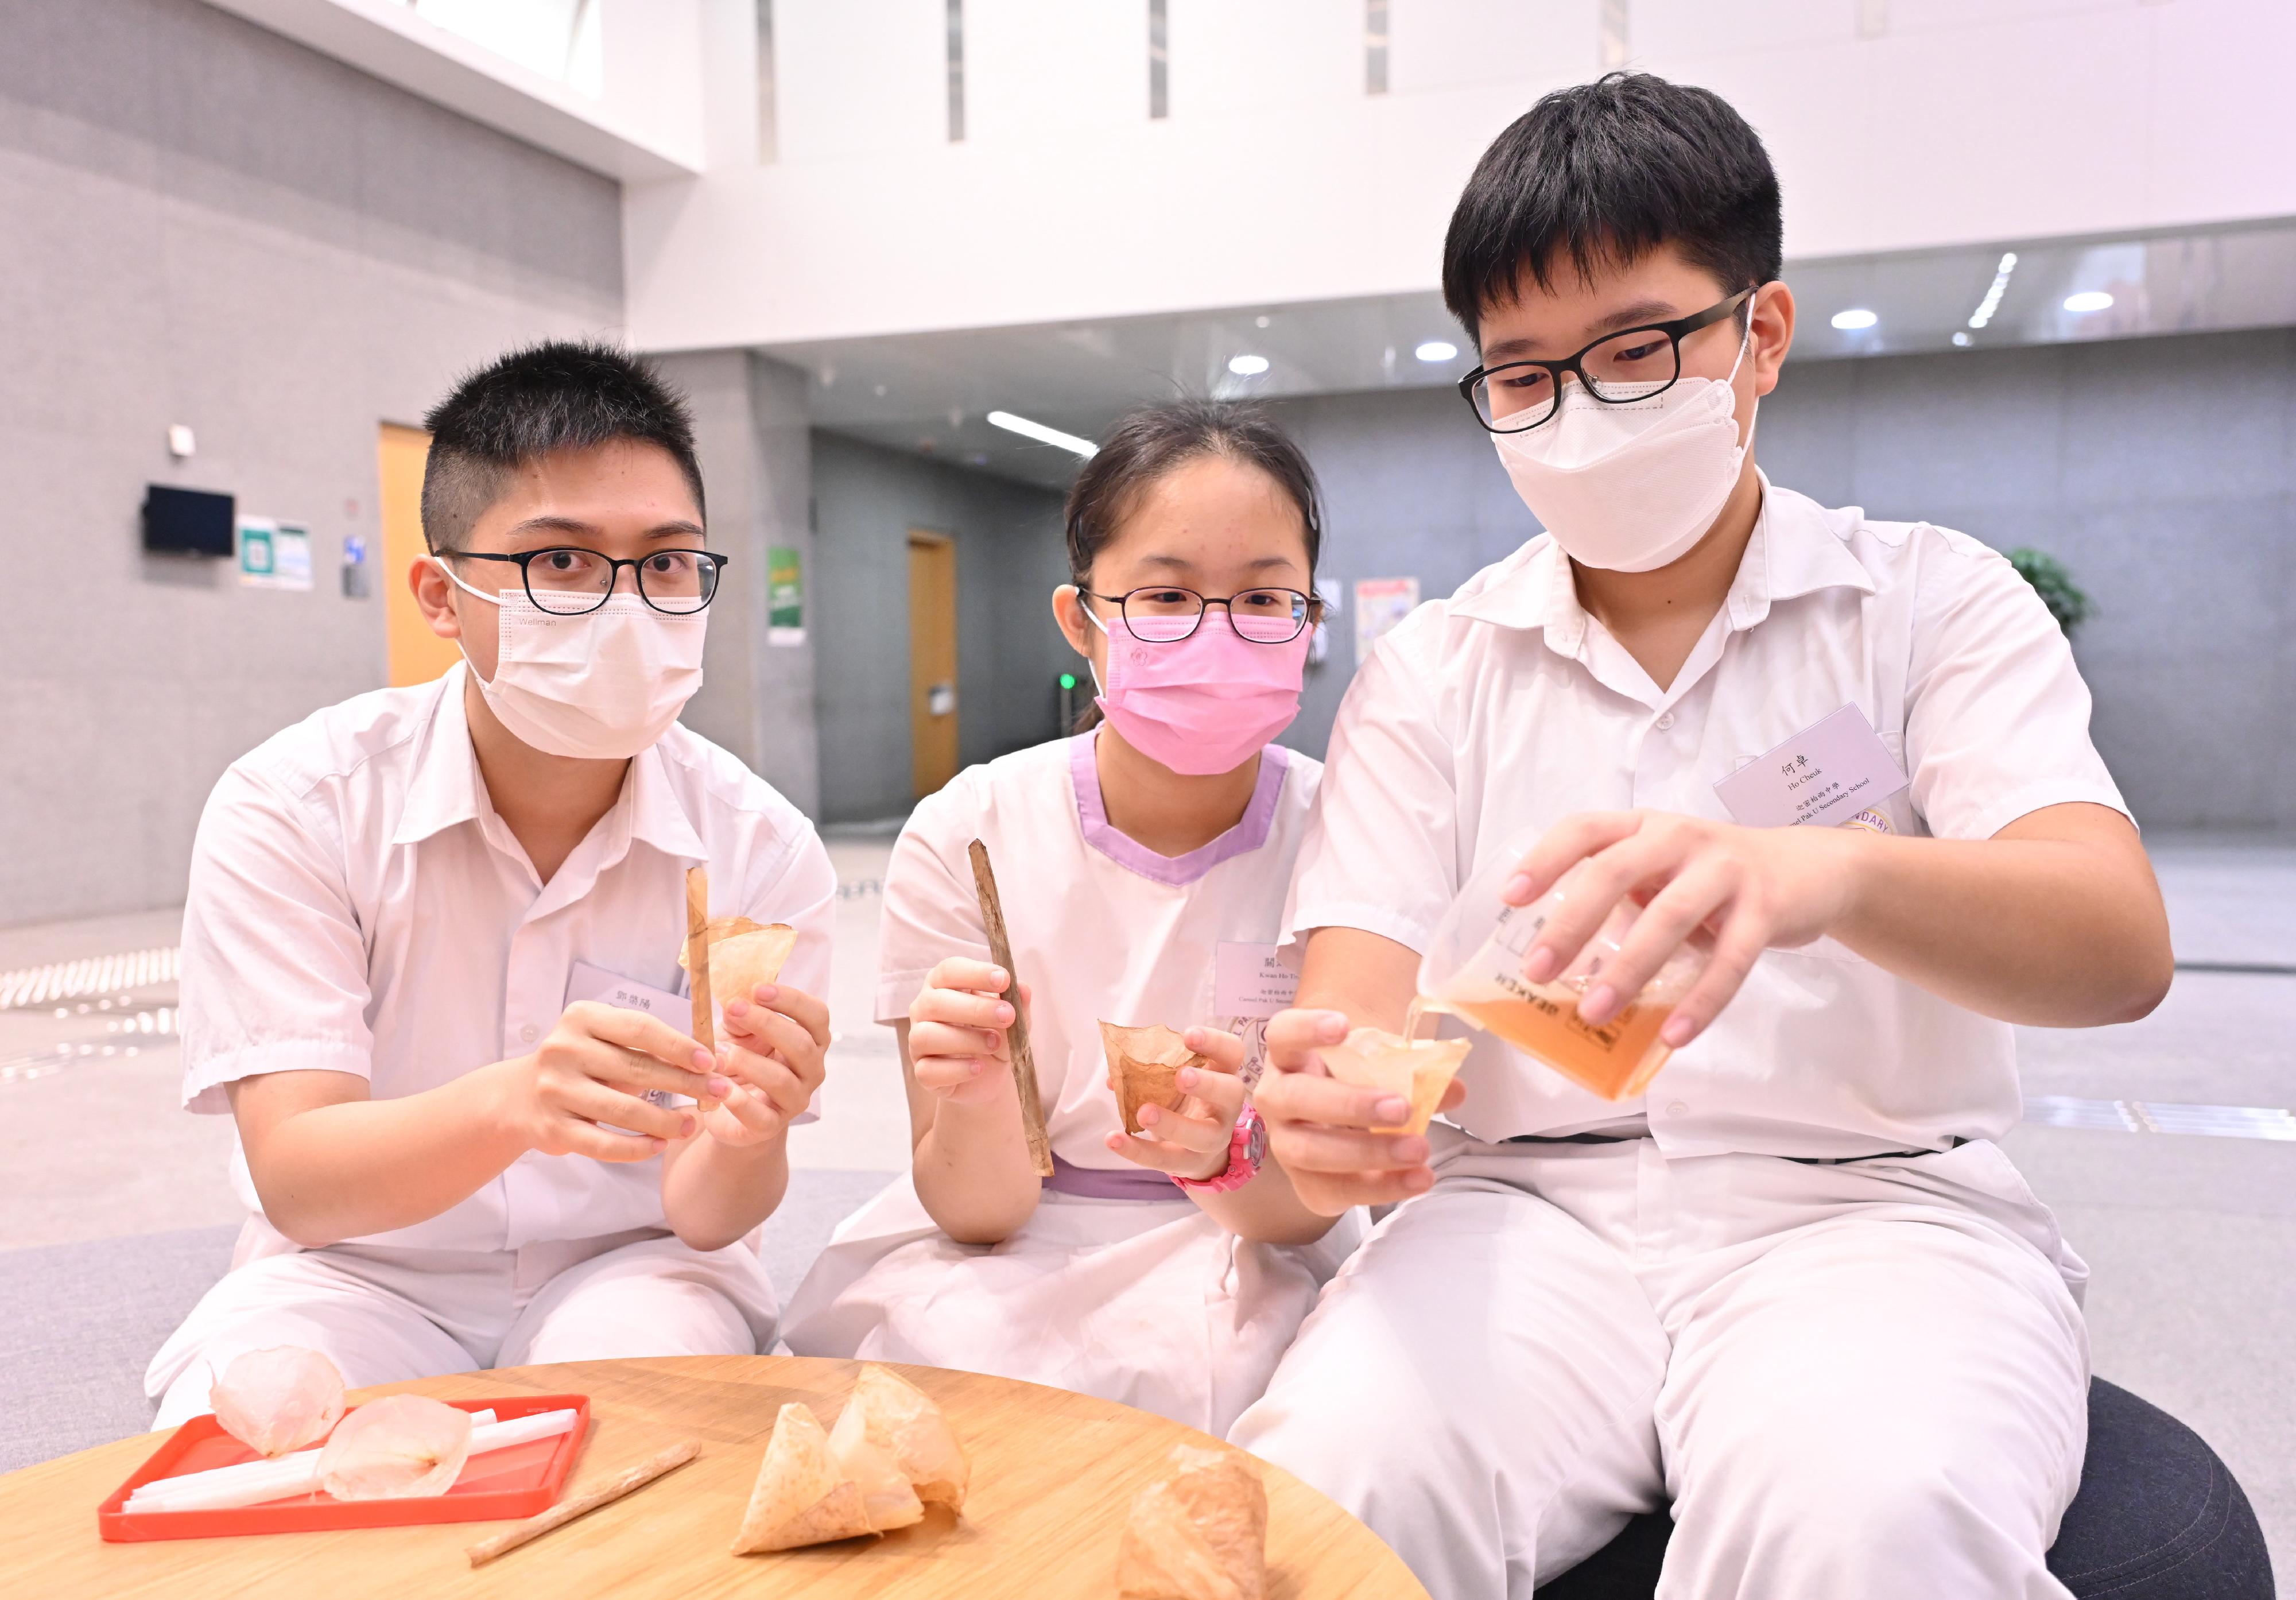 InnoCarnival 2022 will run from October 22 to 30. Picture shows grilled kombucha straws and cups made of fruit skins invented by students of Carmel Pak U Secondary School.